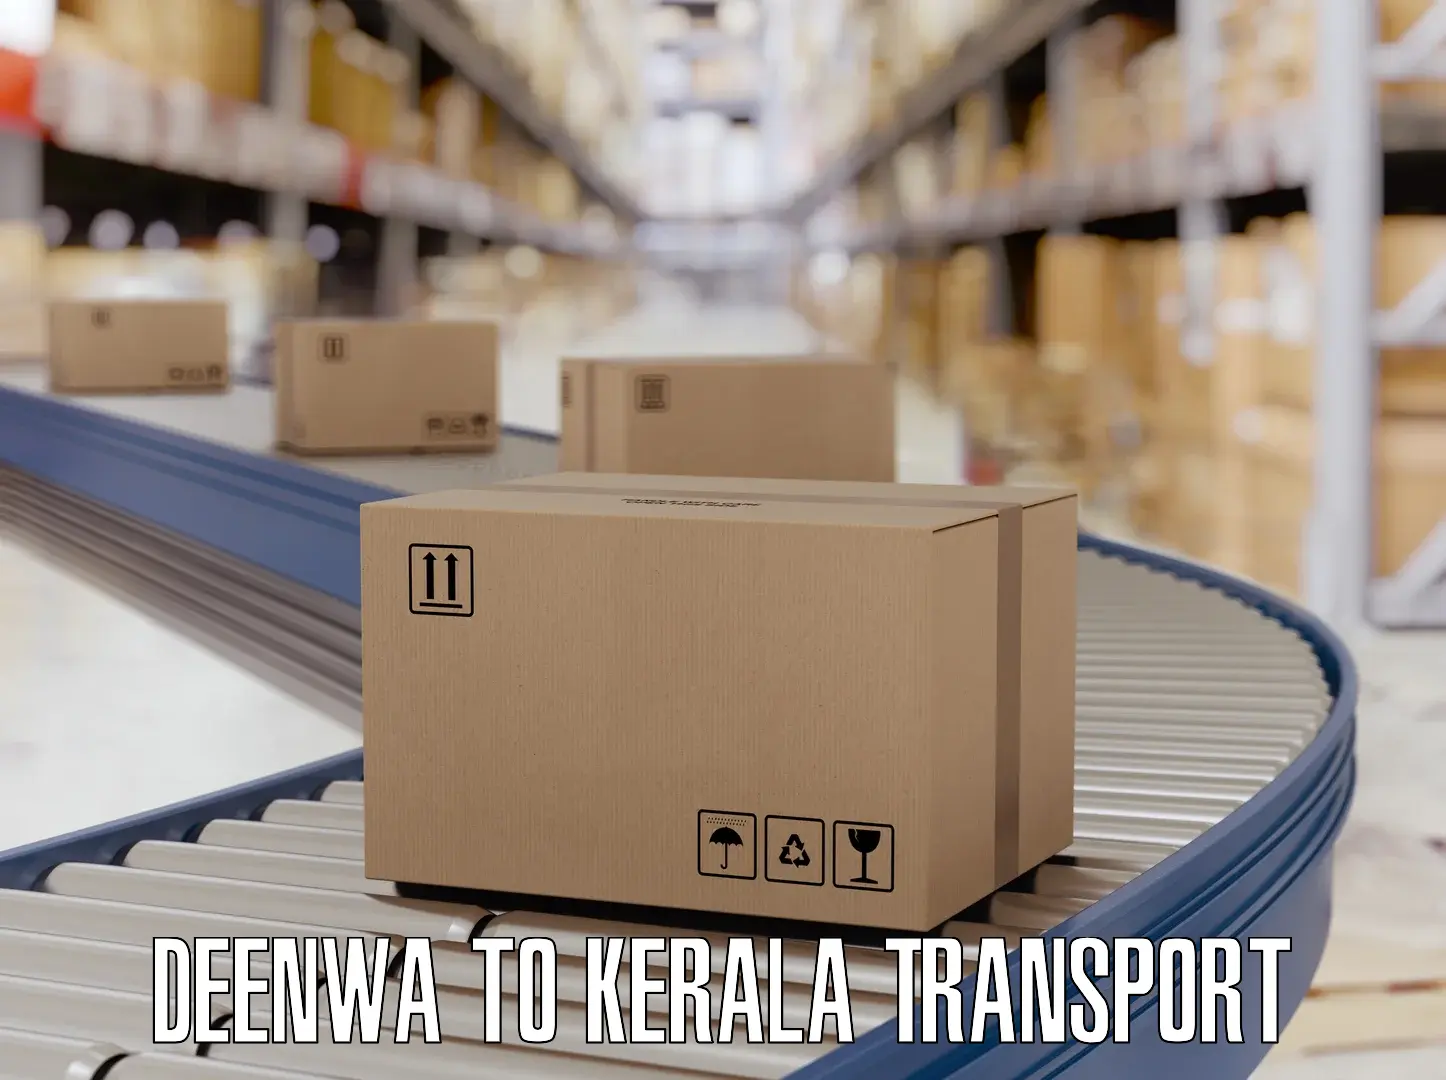 Parcel transport services Deenwa to Mahe